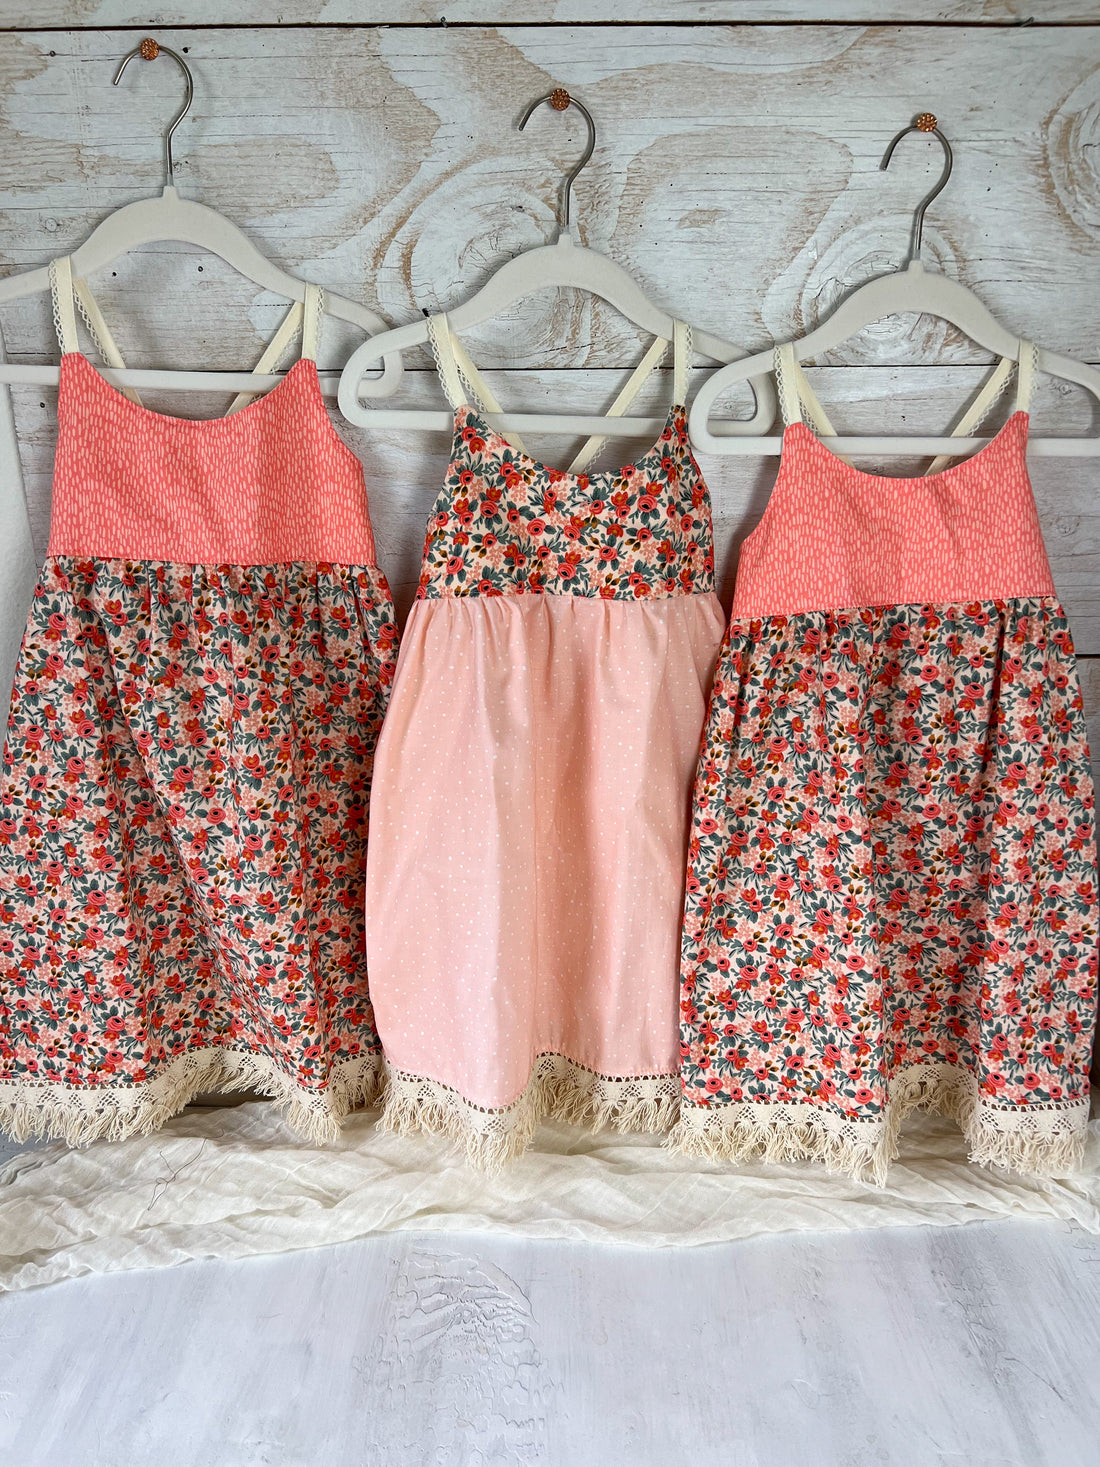 SAMPLE SALE - Petite Floral / Vintage Inspired Dresses - Sizes 2/3 yr and 3/4 yr.